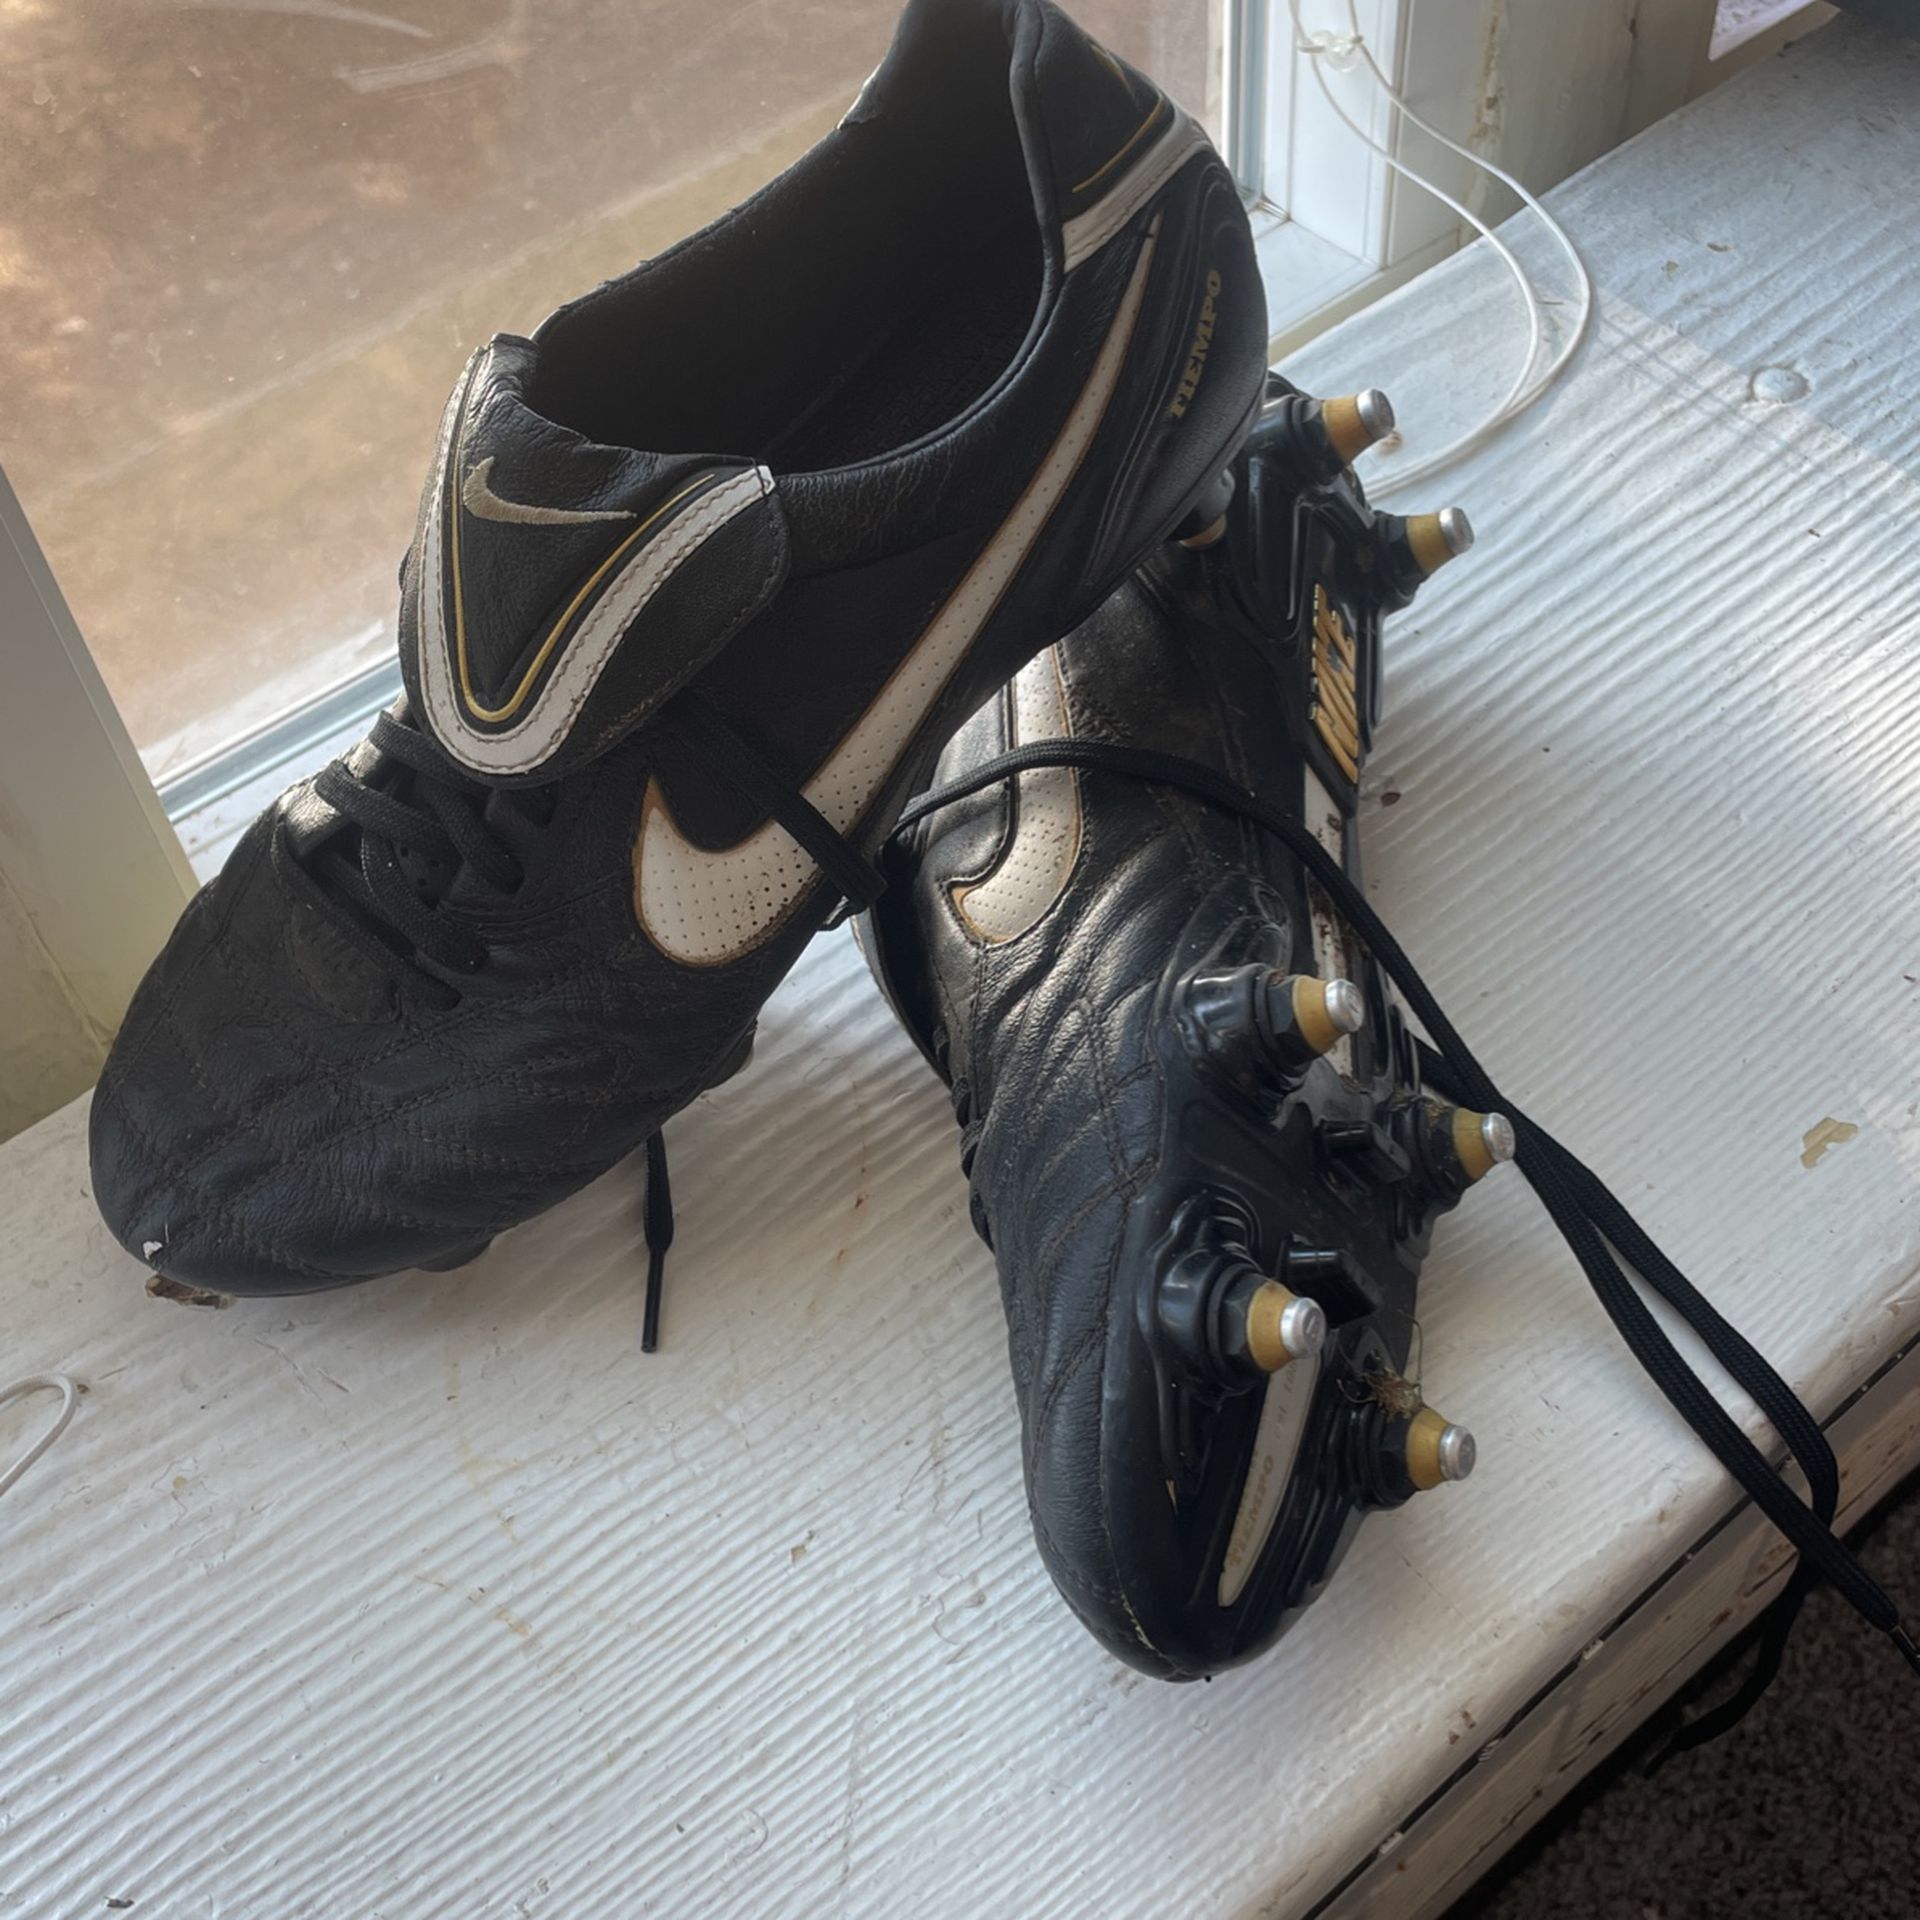 Nike Tiempo Legend III 9 for in San Diego, CA - OfferUp